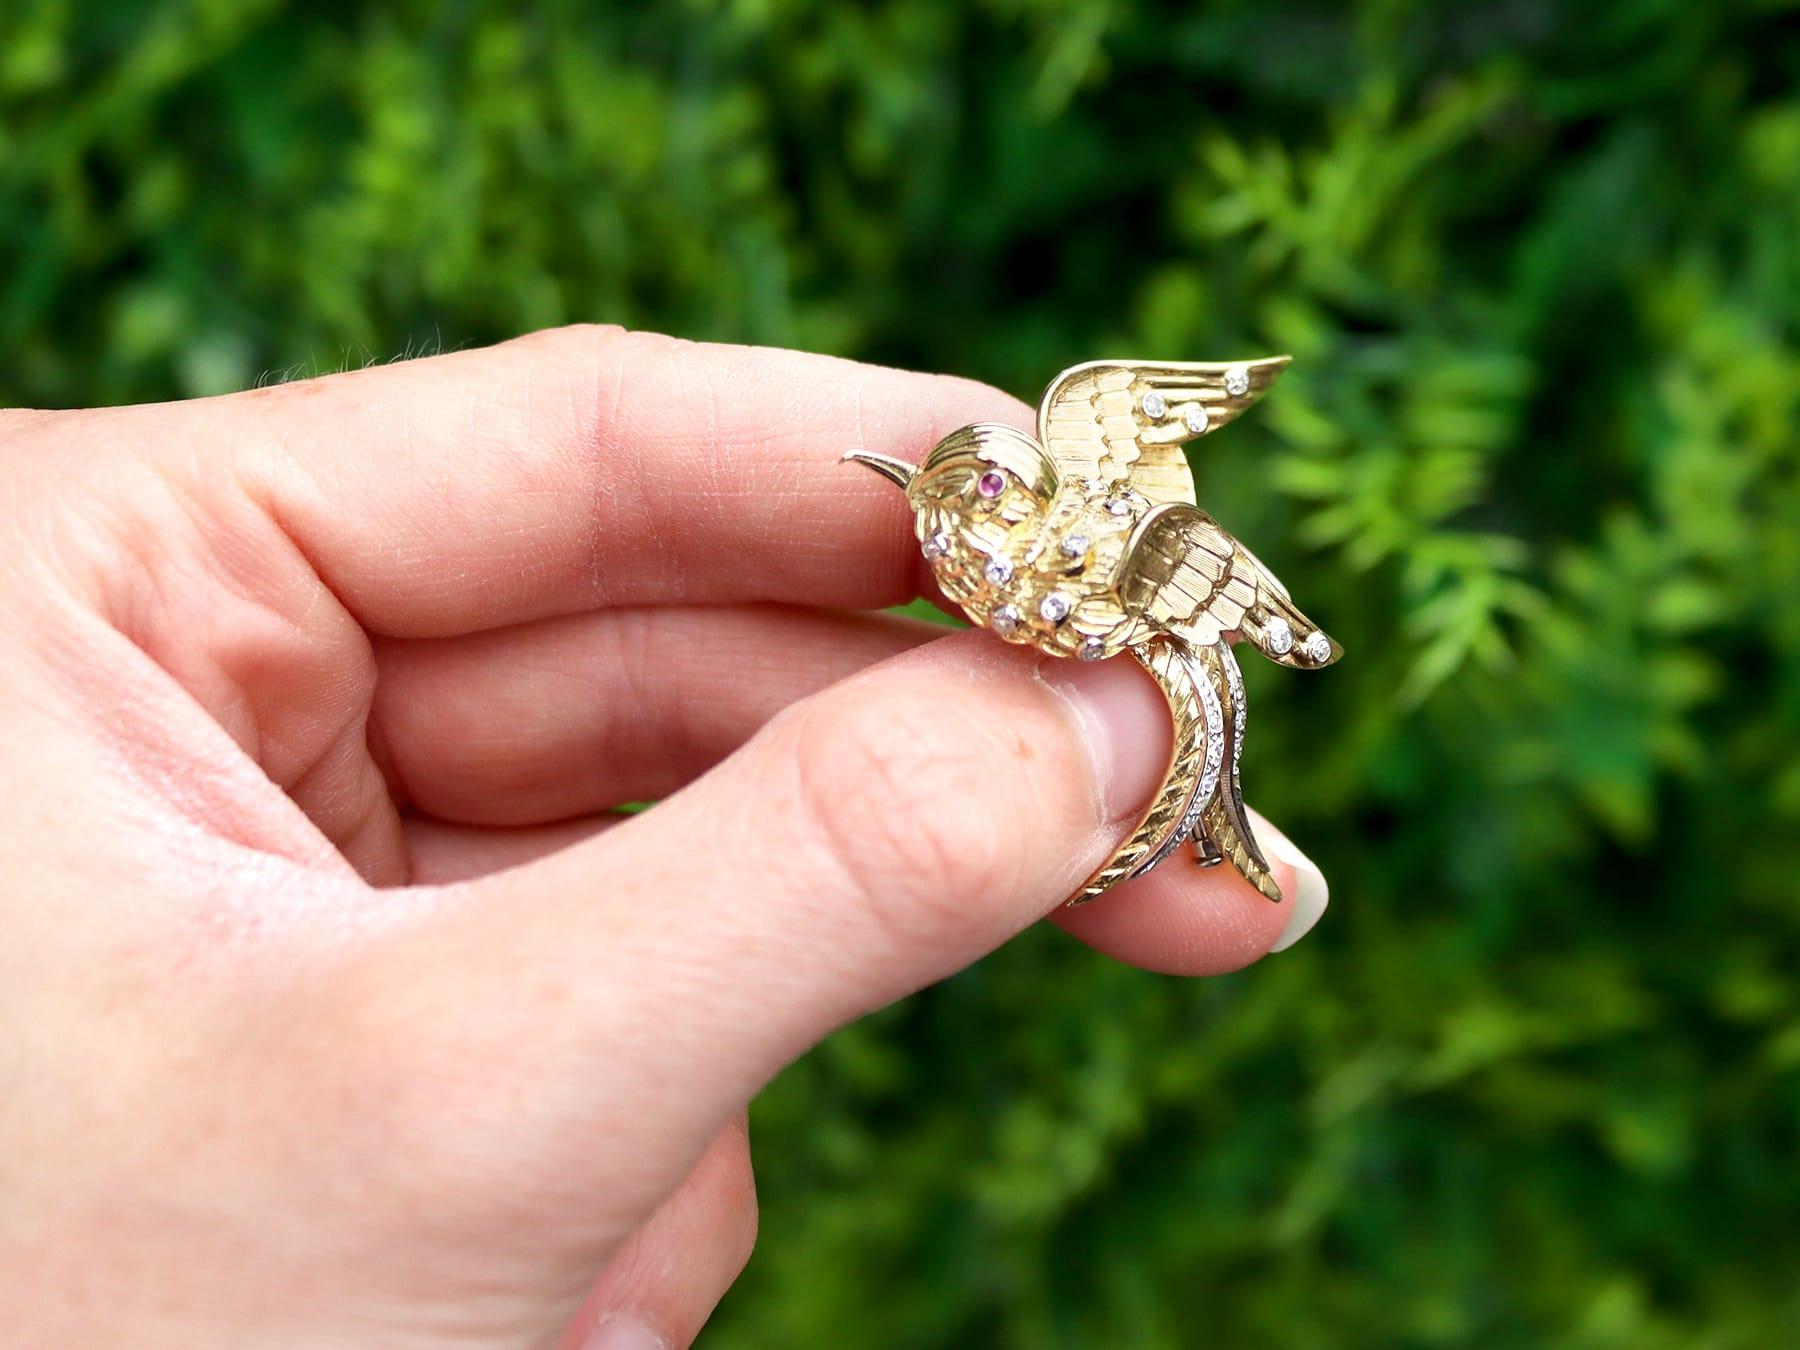 A stunning, fine and impressive antique 0.19 carat diamond and 0.01 carat ruby, 18 karat yellow gold and 18 karat white gold set bird brooch - boxed; part of our diverse antique jewellery and collection of bird brooches

This stunning, fine and